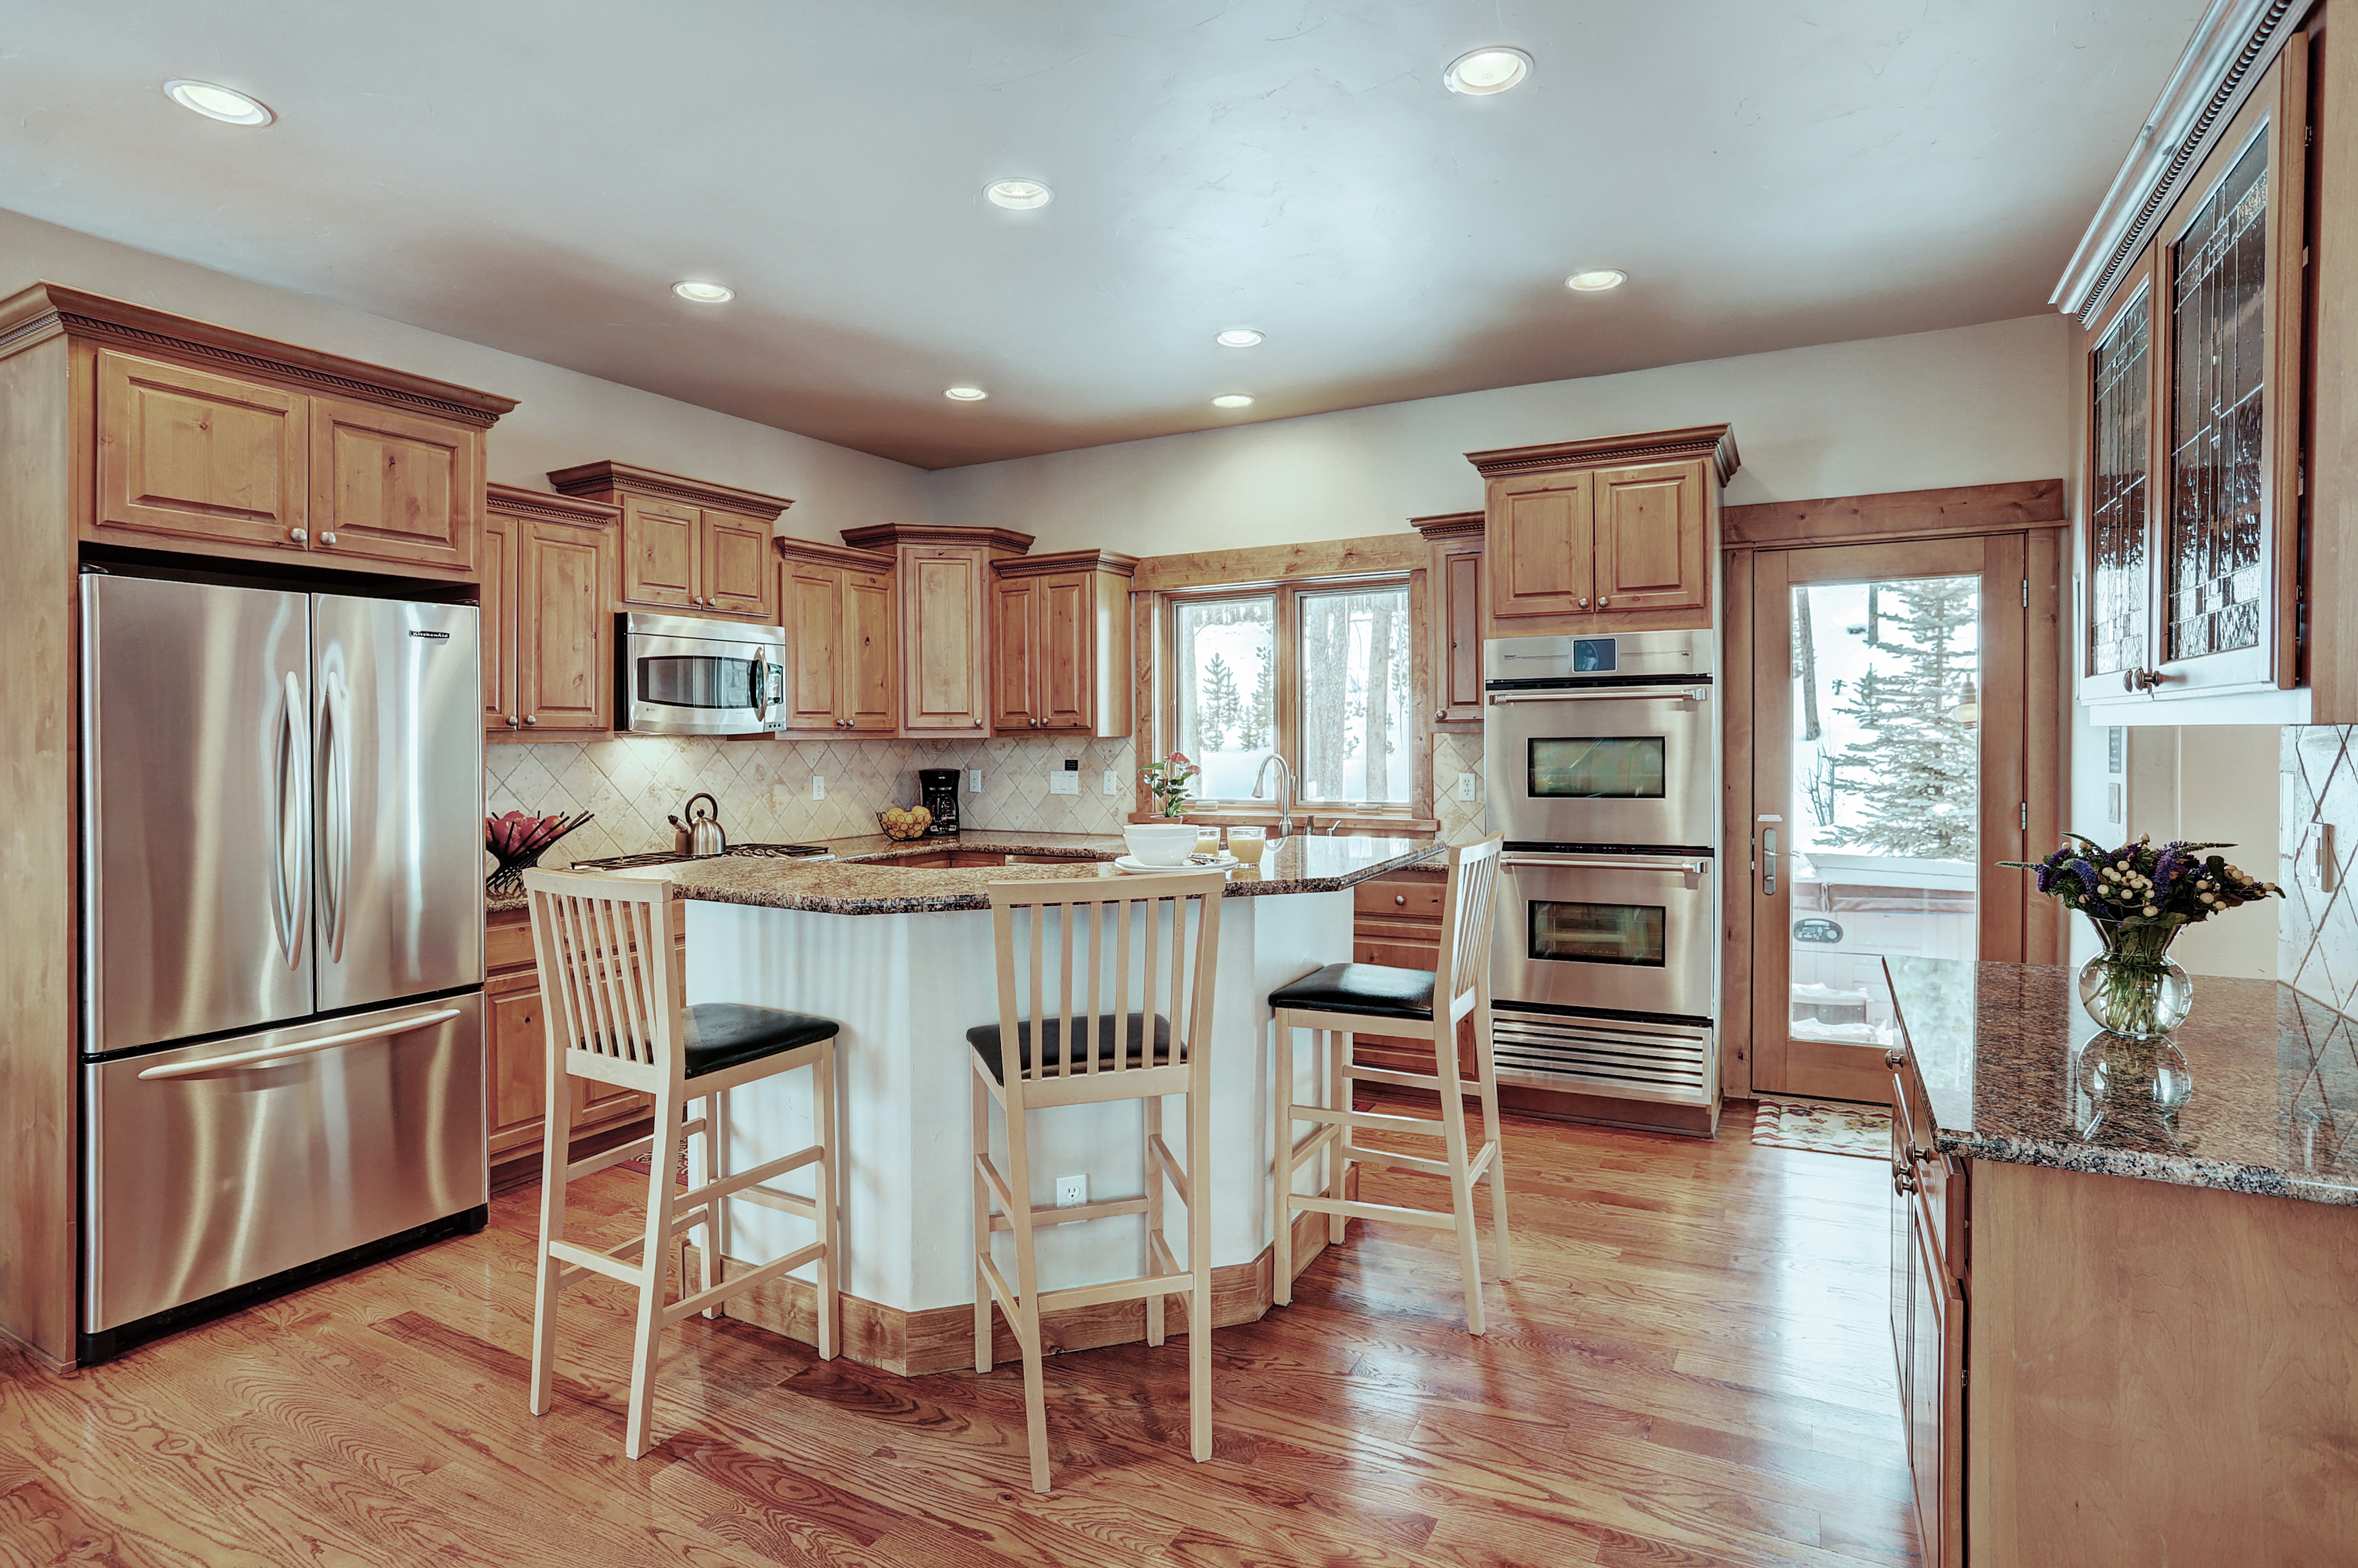 Large, spacious kitchen high end appliances and island seating - Highlands Trail House Breckenridge Vacation Rental